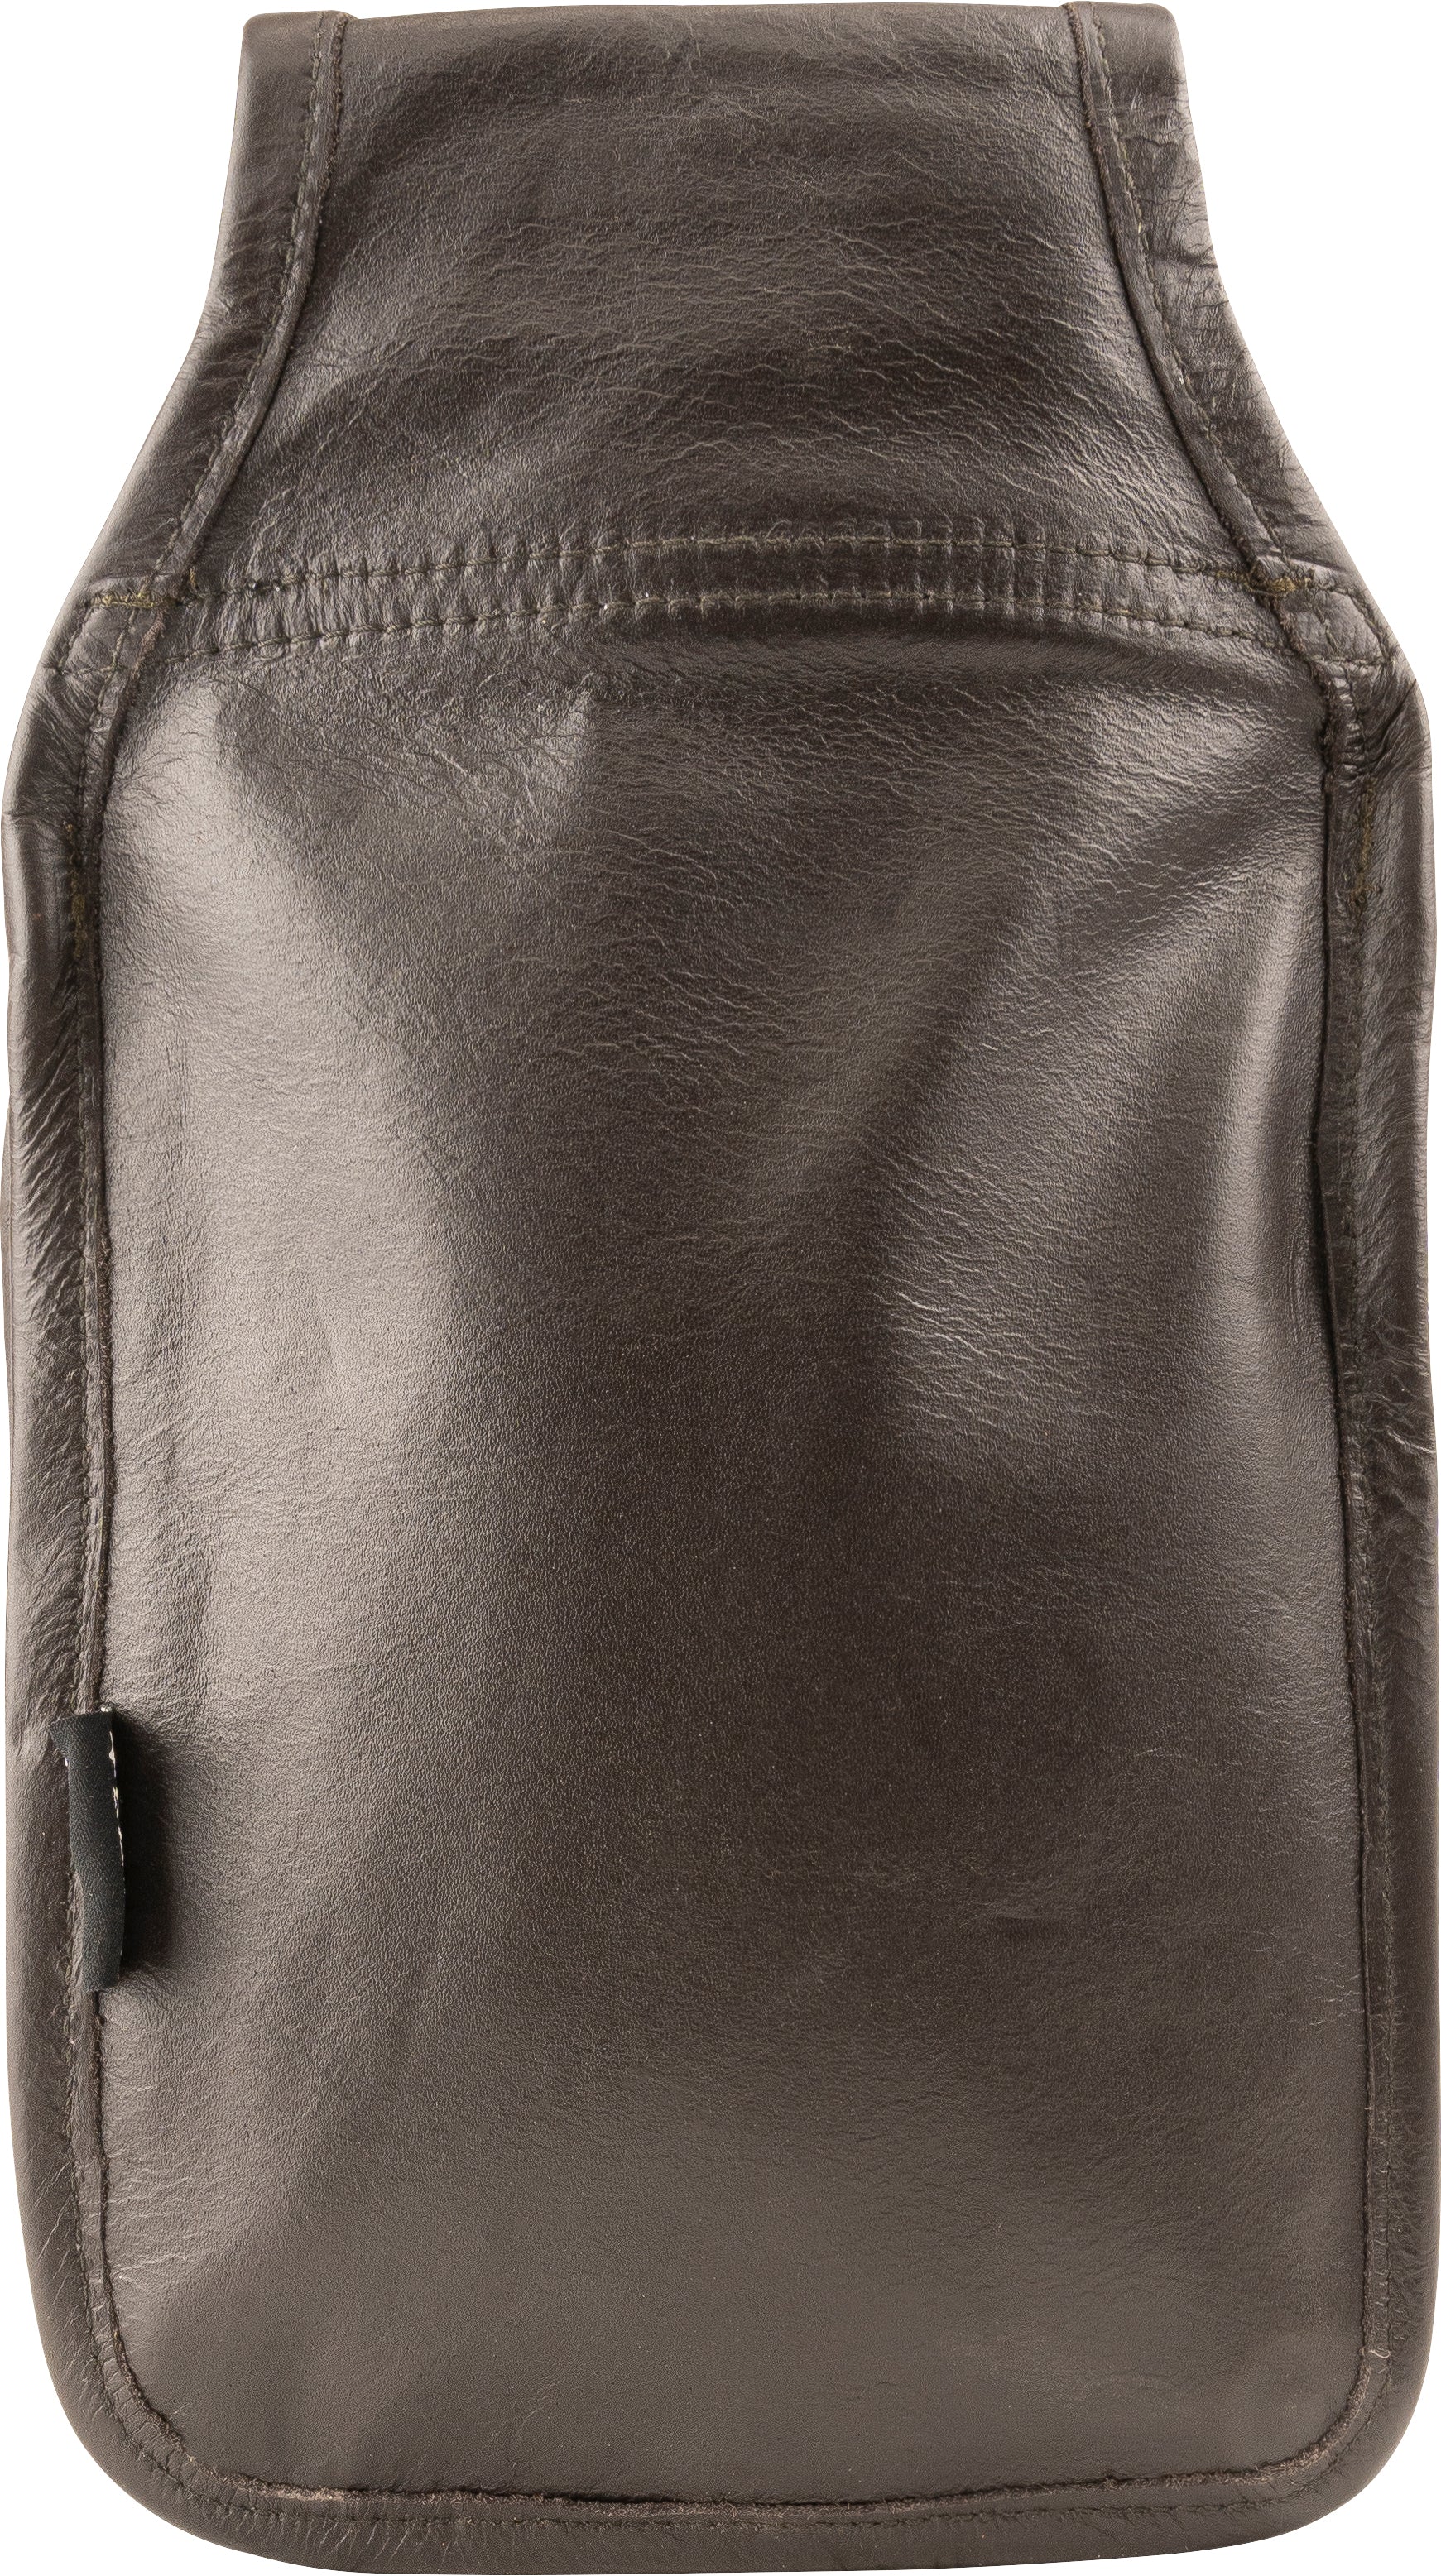 Jack Pyke Leather Cartridge Pouch in Brown 